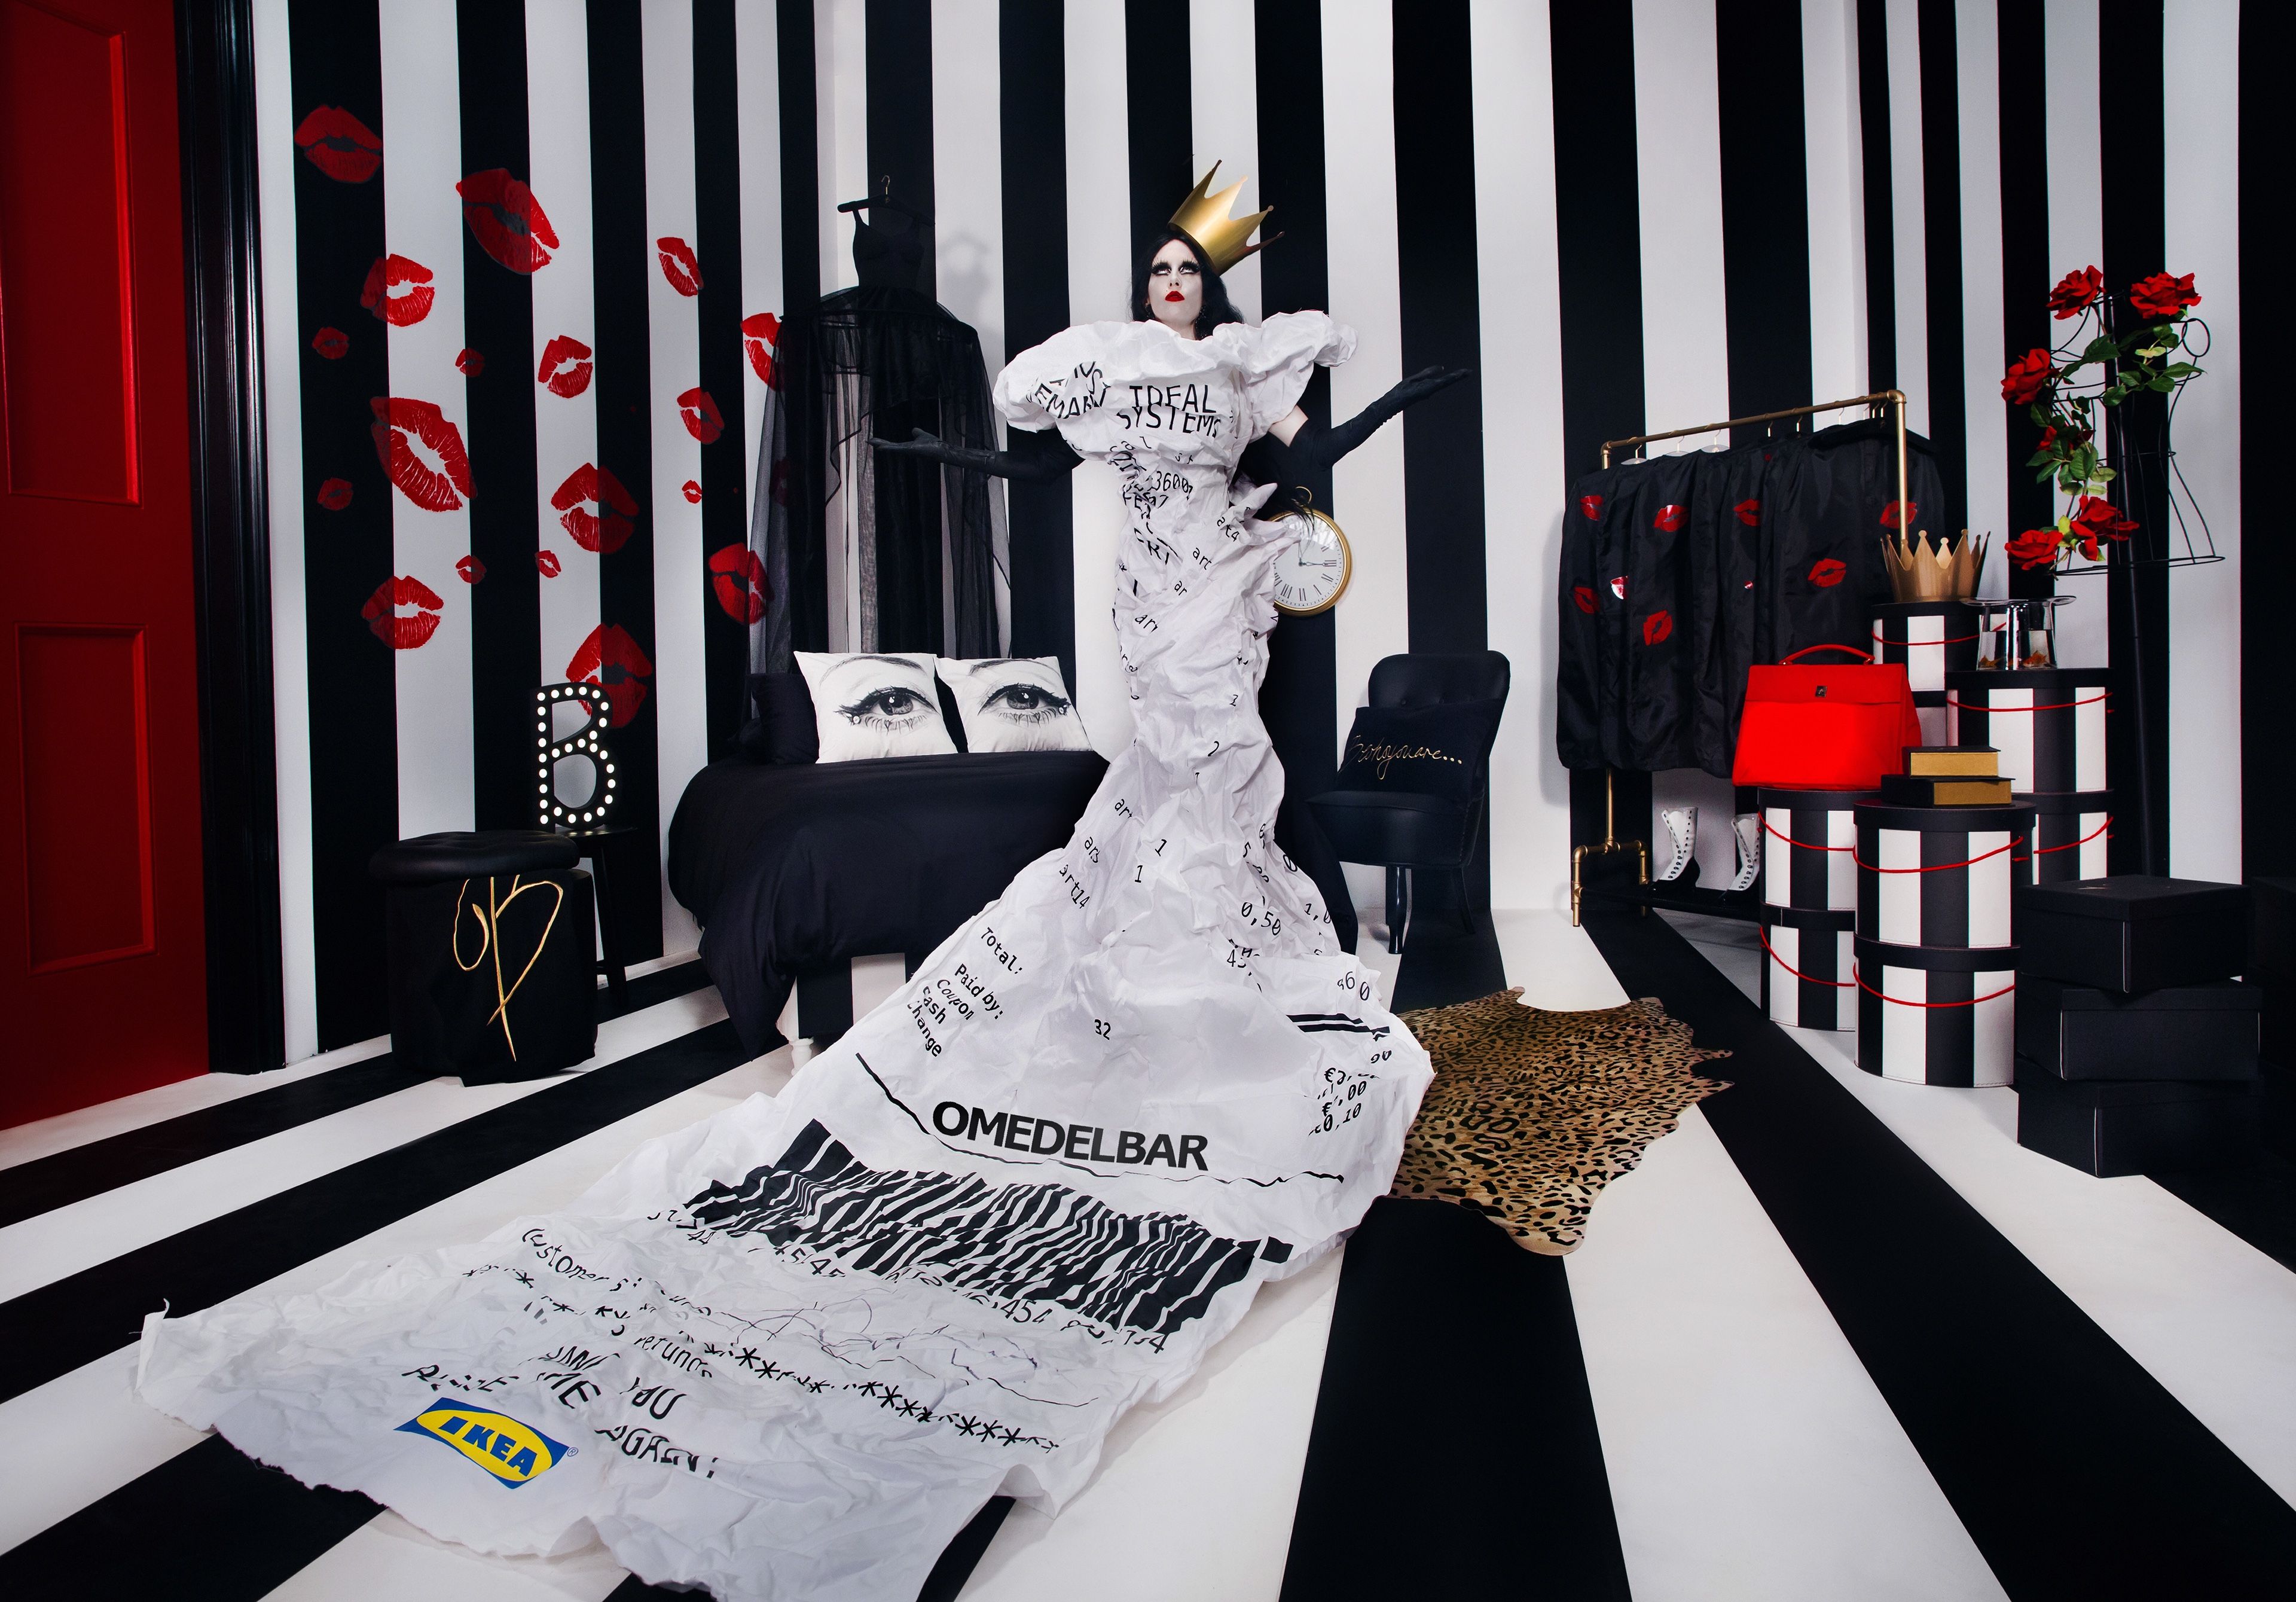 Goth meets glamour in IKEA’s OMEDELBAR limited edition collection